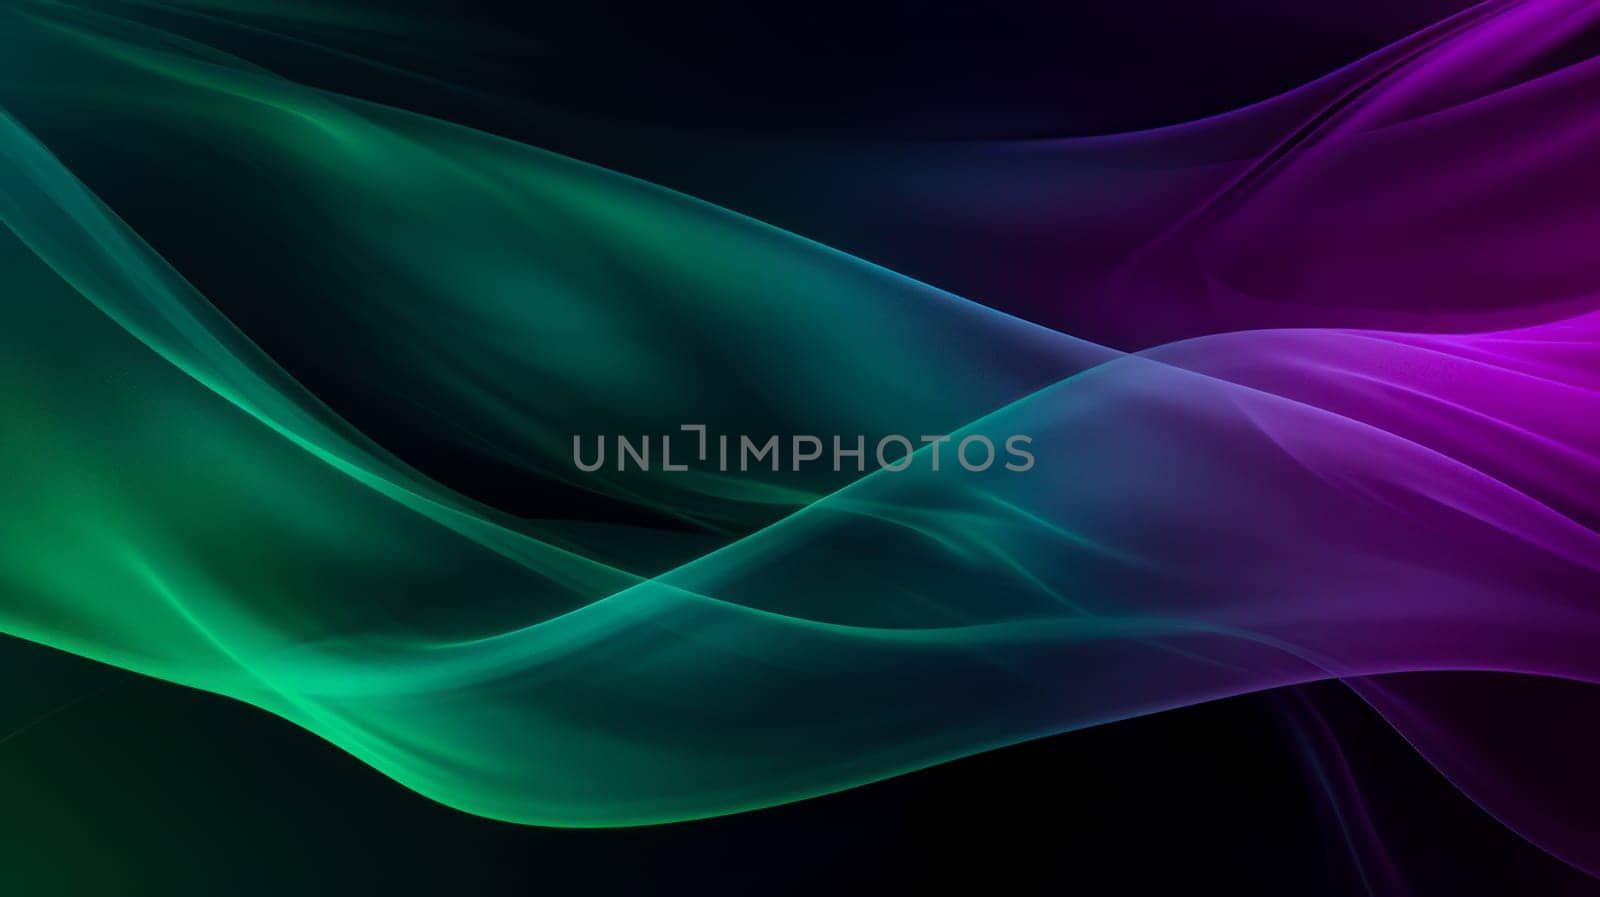 Beautiful luxury 3D modern abstract neon red purple green background composed of waves with light digital effect in futuristic style